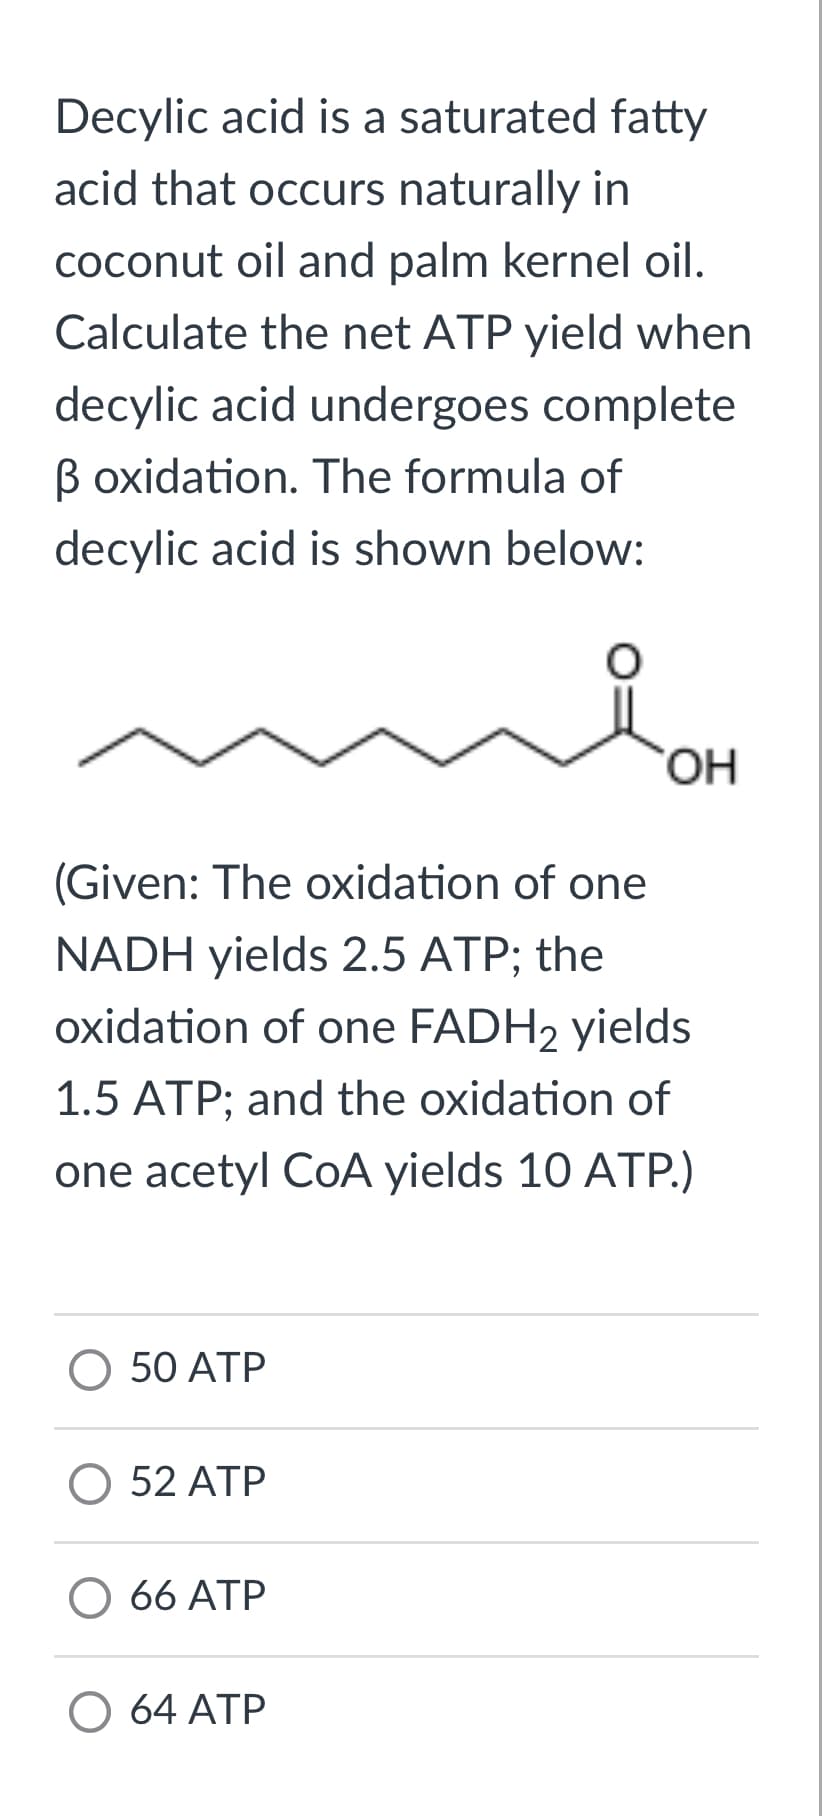 Decylic acid is a saturated fatty
acid that occurs naturally in
coconut oil and palm kernel oil.
Calculate the net ATP yield when
decylic acid undergoes complete
B oxidation. The formula of
decylic acid is shown below:
(Given: The oxidation of one
NADH yields 2.5 ATP; the
oxidation of one FADH2 yields
1.5 ATP; and the oxidation of
one acetyl CoA yields 10 ATP.)
O 50 ATP
O 52 ATP
66 ATP
OH
O 64 ATP